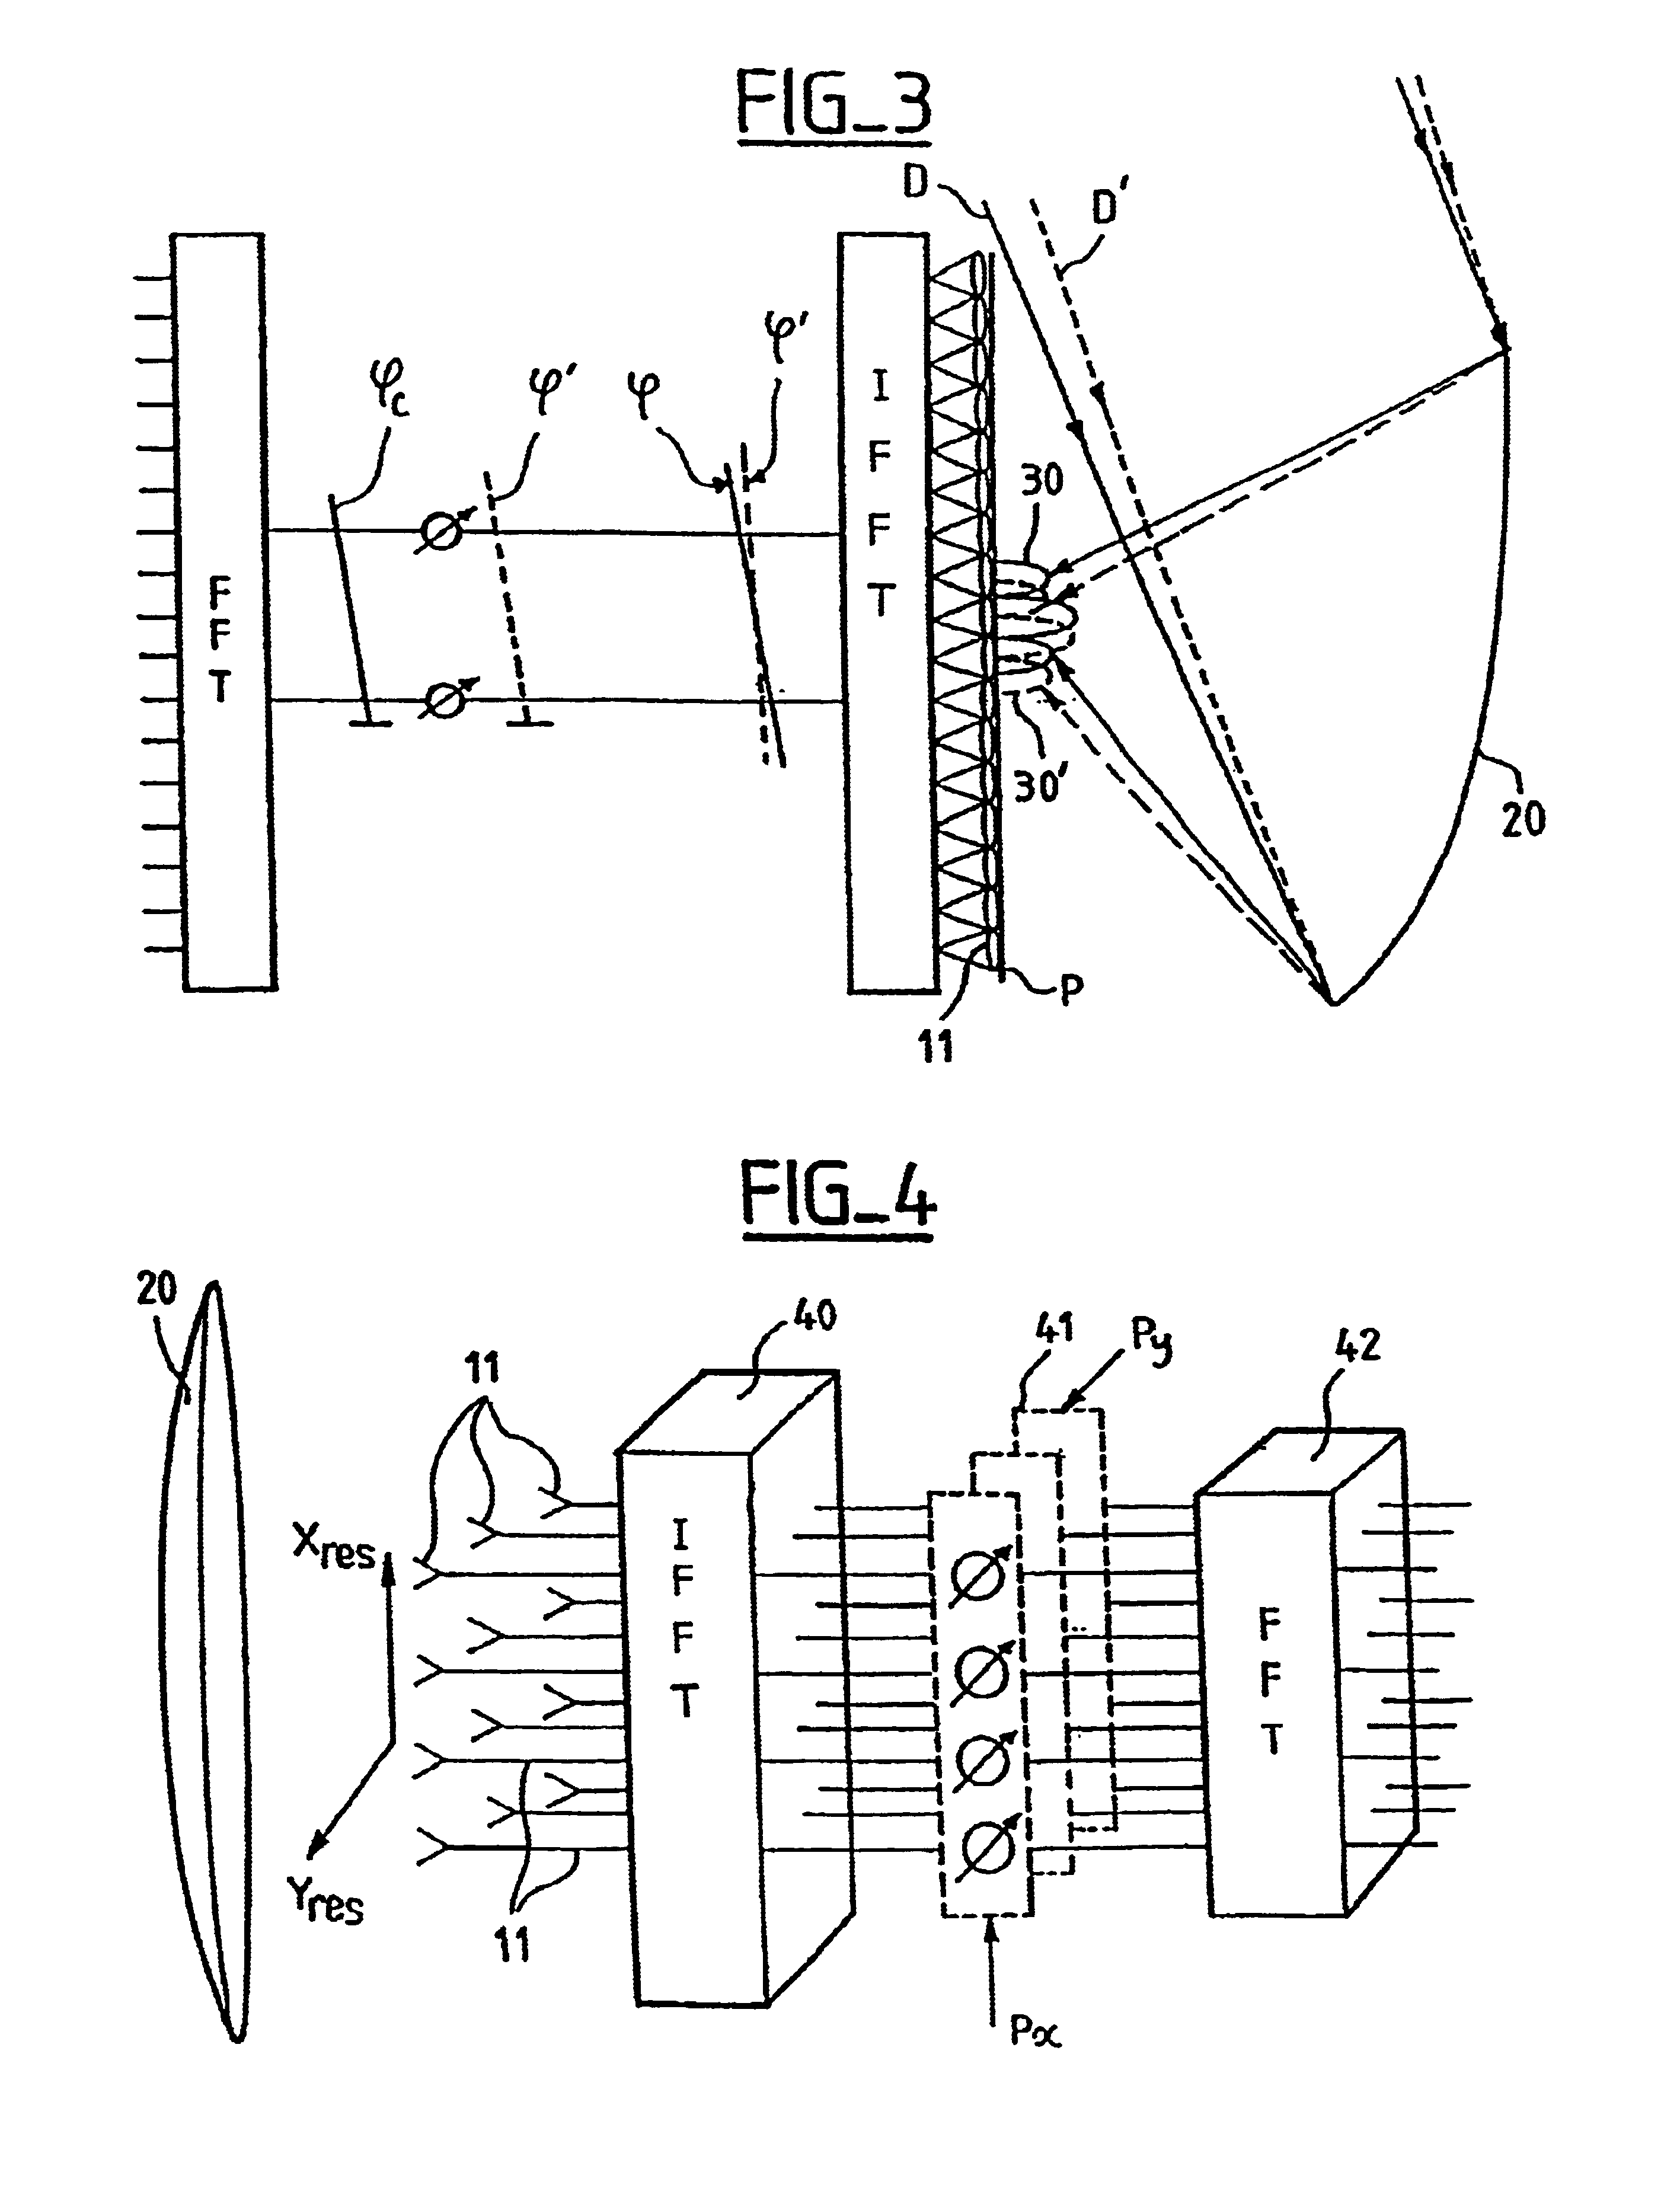 Method of repointing a reflector array antenna